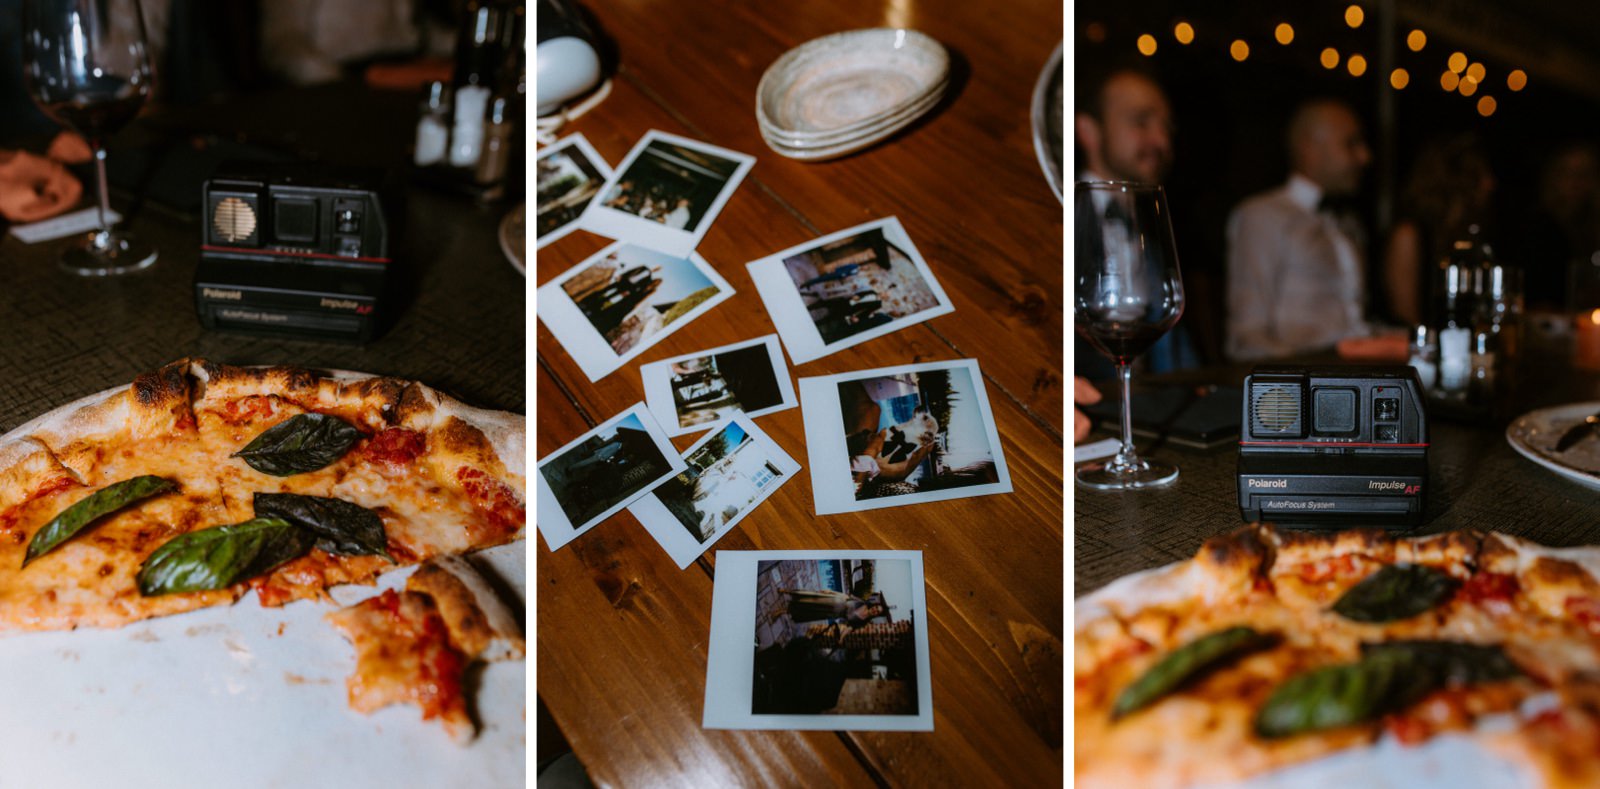 pizza and polaroid details from a wedding in Croatia